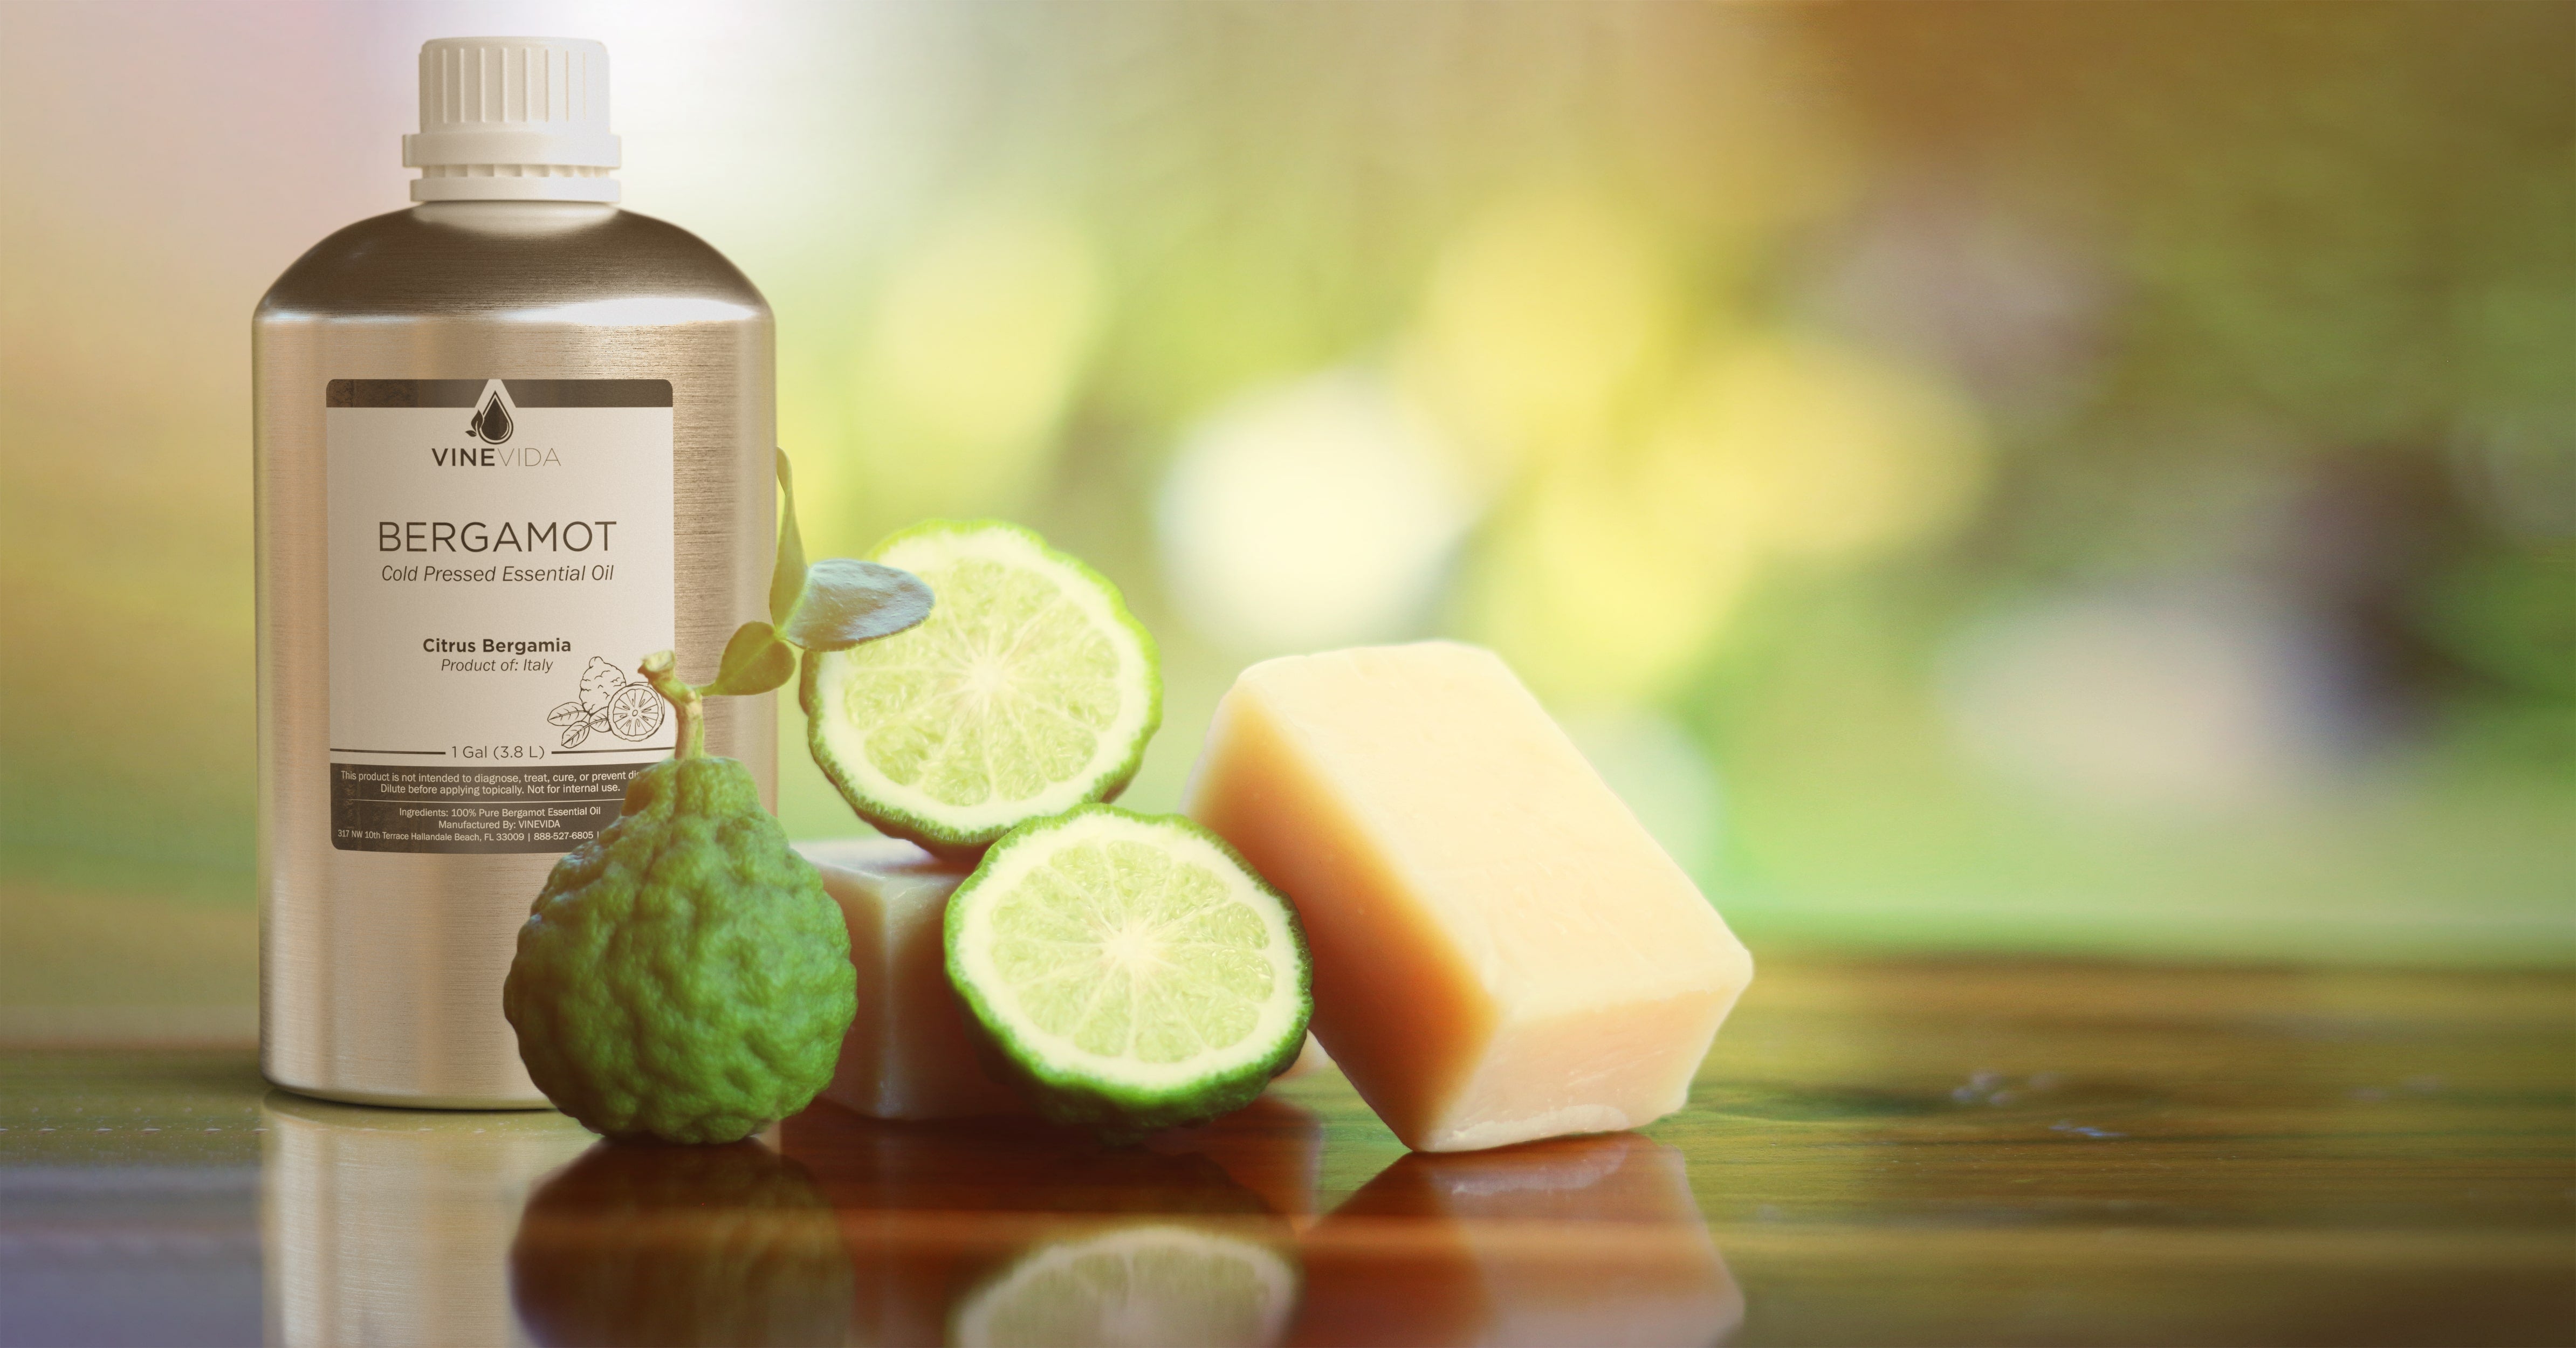 Best Fragrance Oils for Soap Making at Best Prices